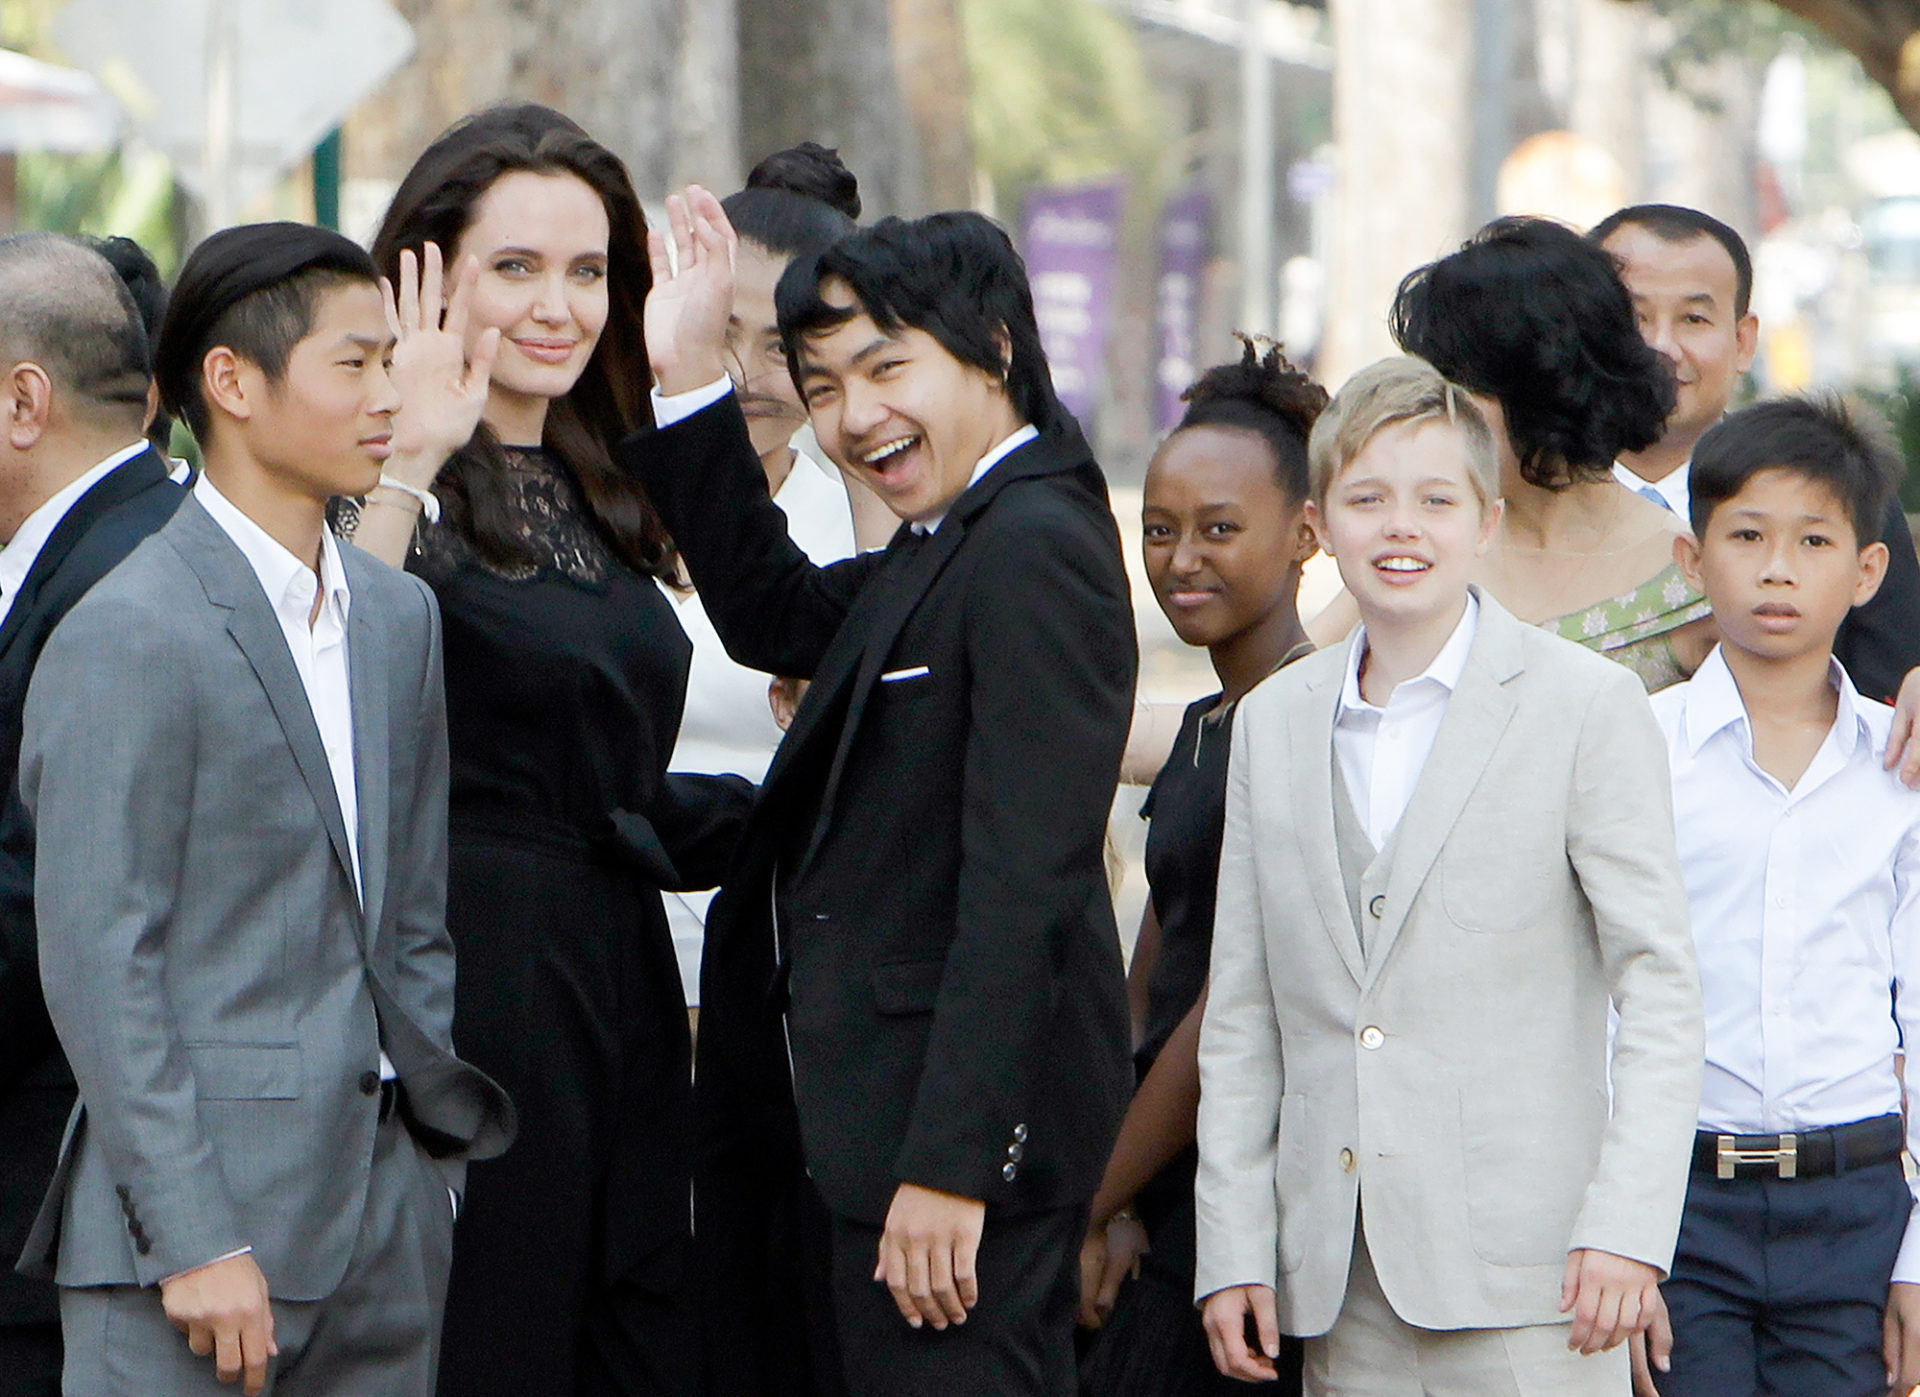 Hollywood actress Angelina Jolie, second from left, waves with her adopted children Pax, left, Maddox, center, Zahara, third from right, and Shiloh, second from right, while they wait to meet Cambodia's King Norodom Sihamoni in Siem Reap province, Cambodia, Saturday, Feb. 18, 2017. Jolie on Saturday launches her two-day film screening of "First They Killed My Father" in the Angkor complex in Siem Reap province. (AP Photo/Heng Sinith)